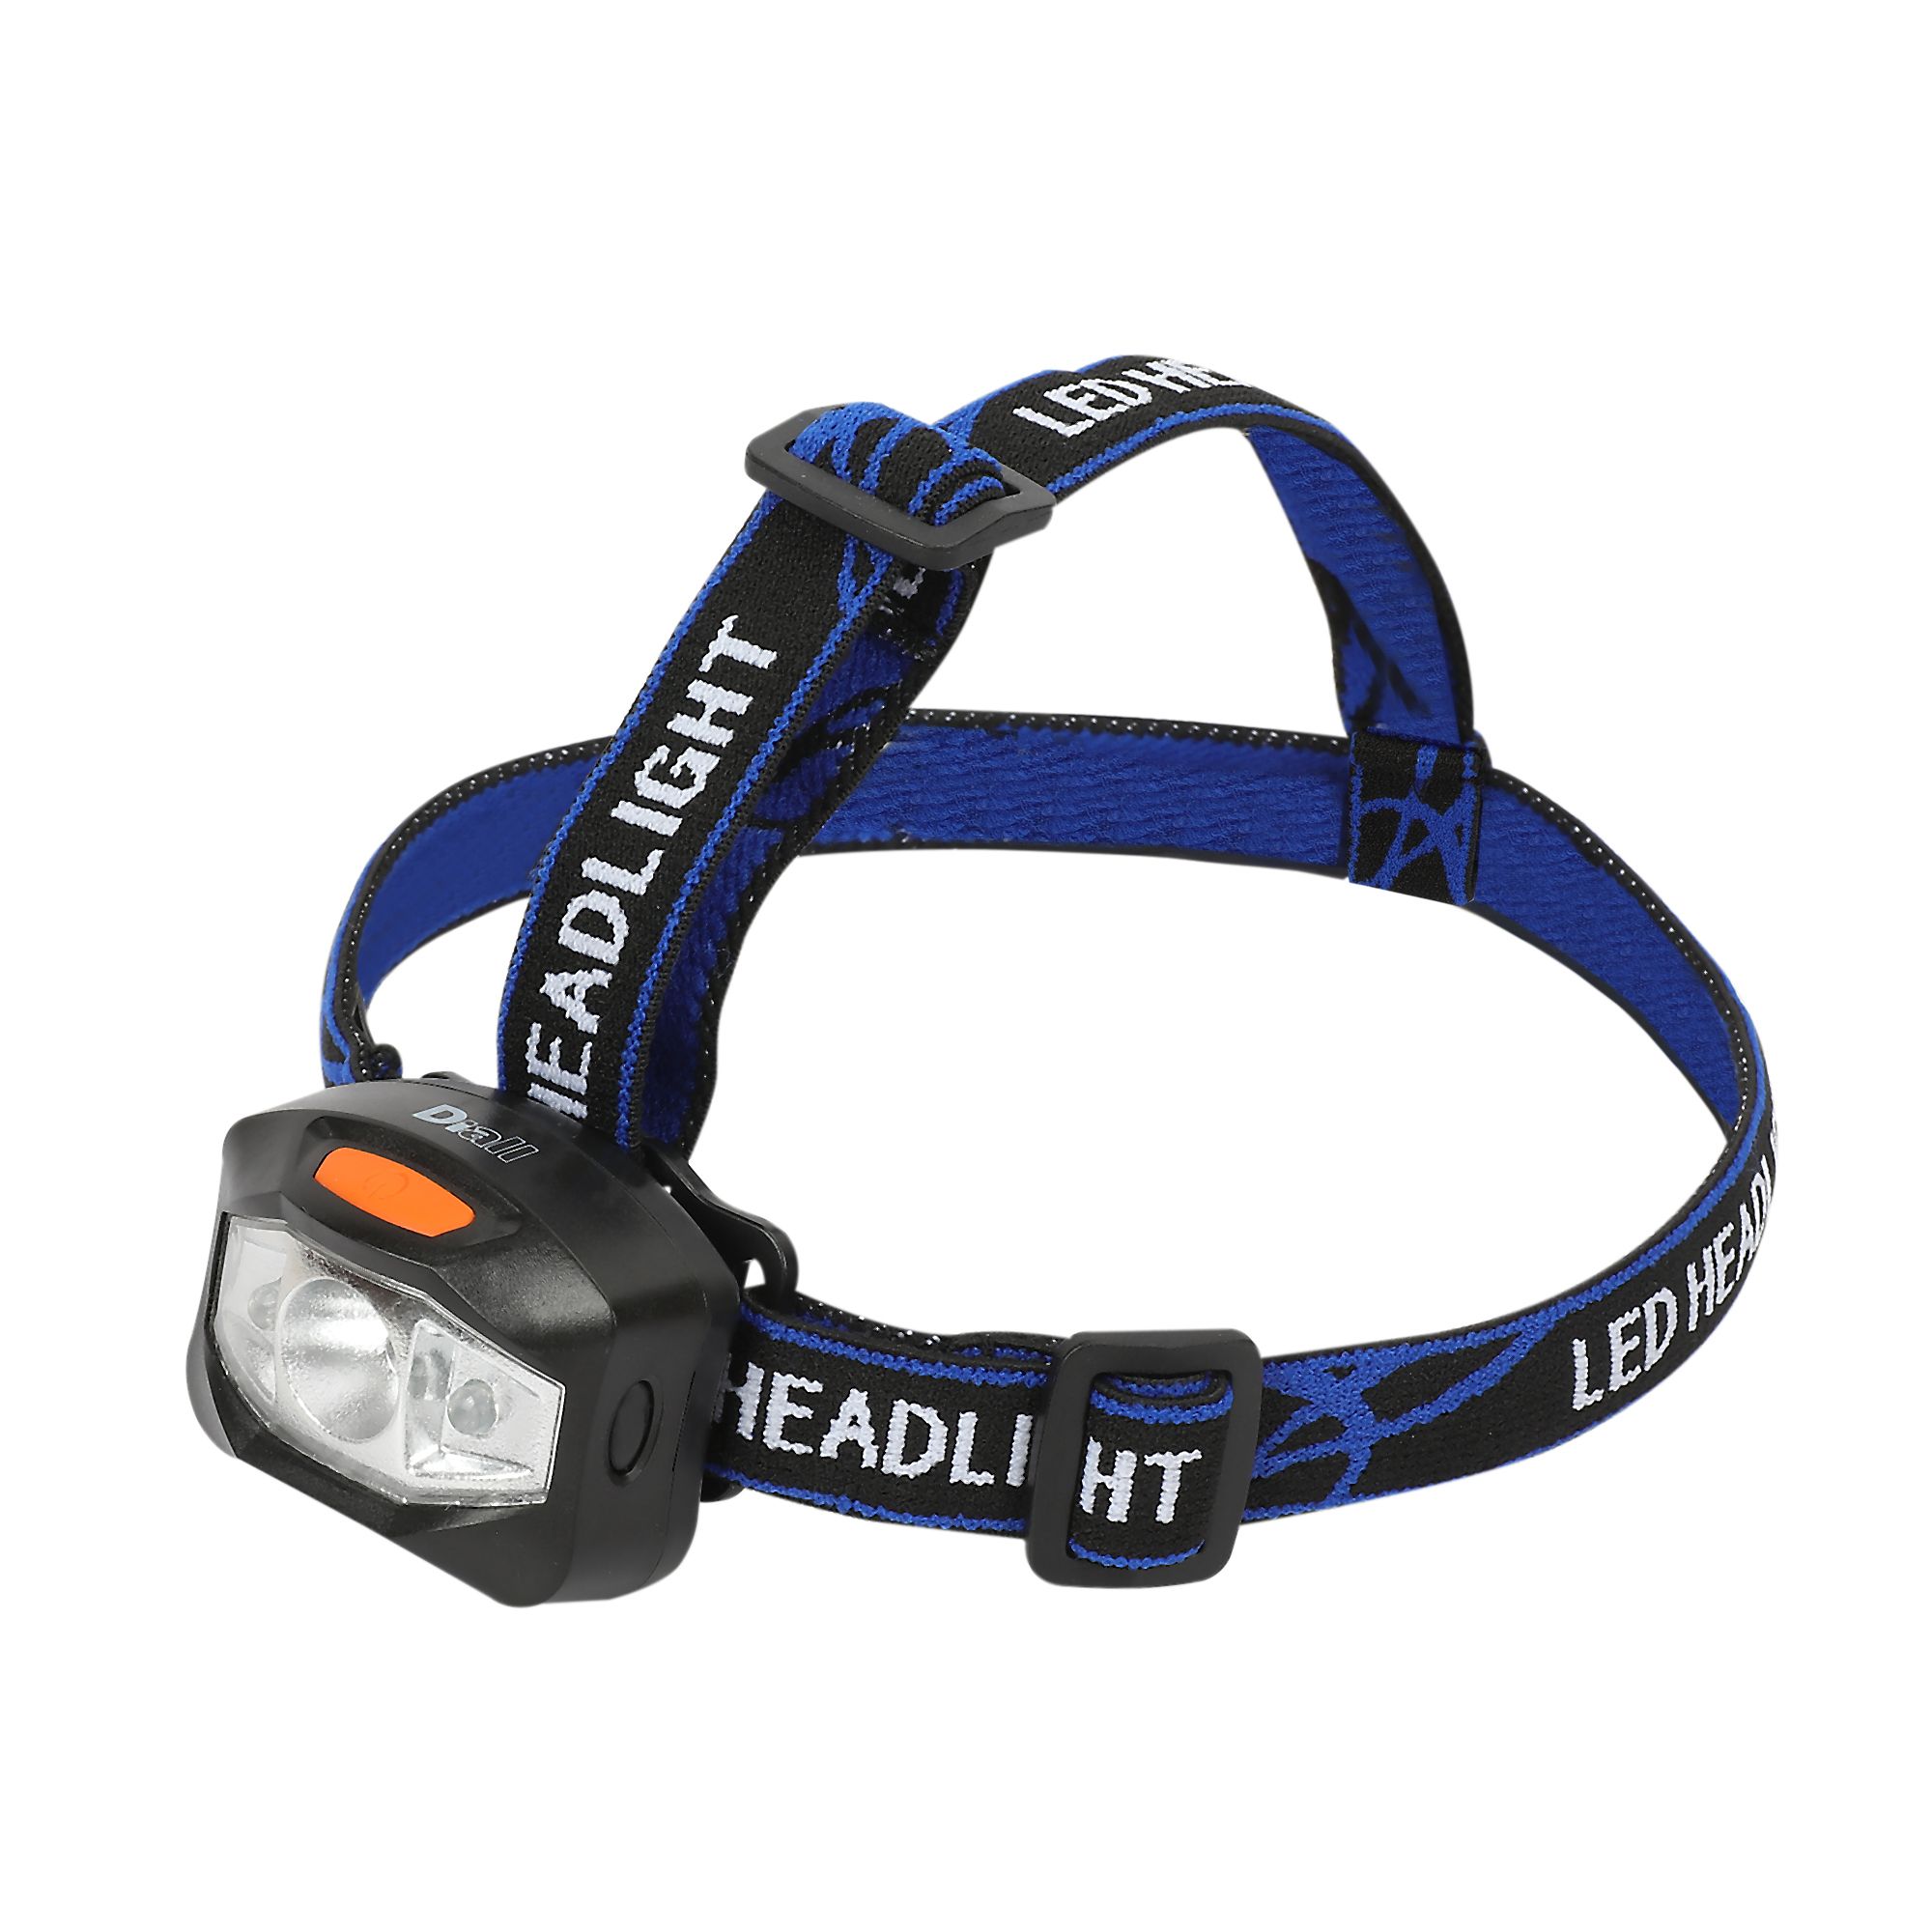 Diall 140Lm Led Head Light